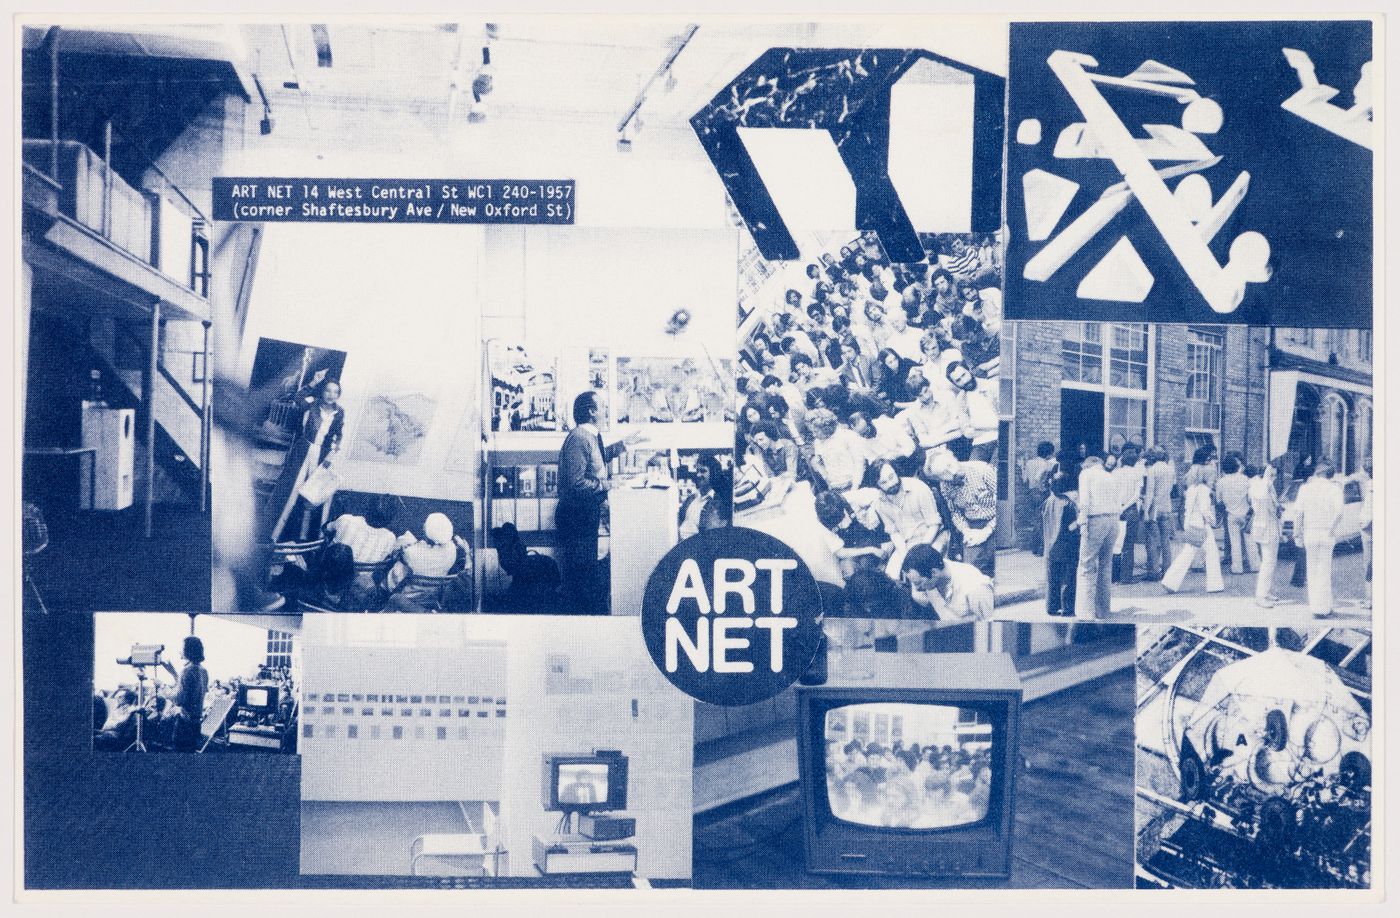 Postcard featuring collaged images of the Art Net gallery, exhibitions, events, recordings, audience members, and artworks